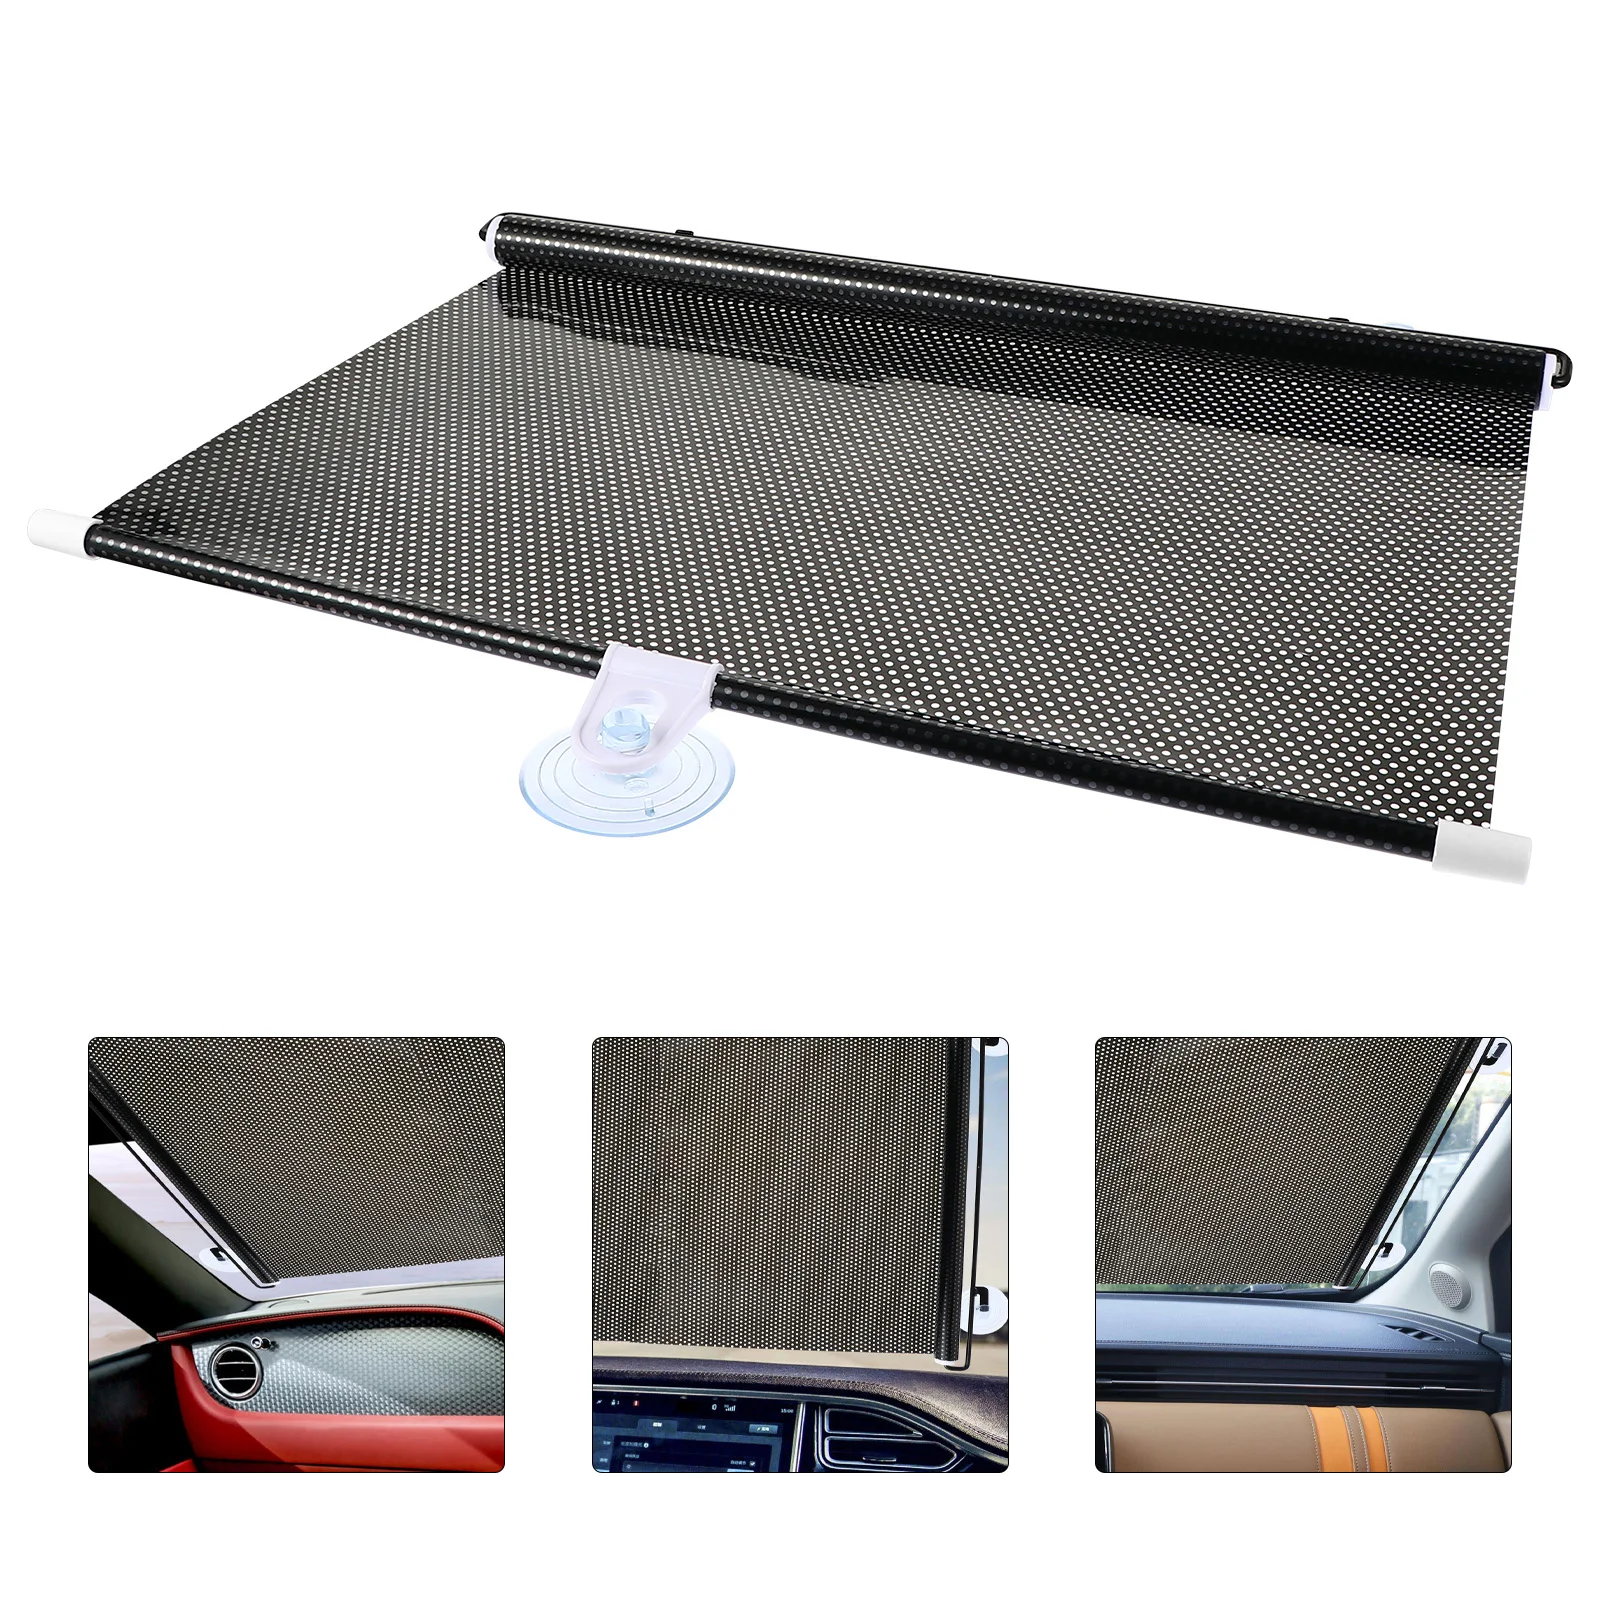 

Retractable Car Window Sun Shades - Block Harmful UV Rays and Glare Keep Your Kids and Pets Cool and Comfortable